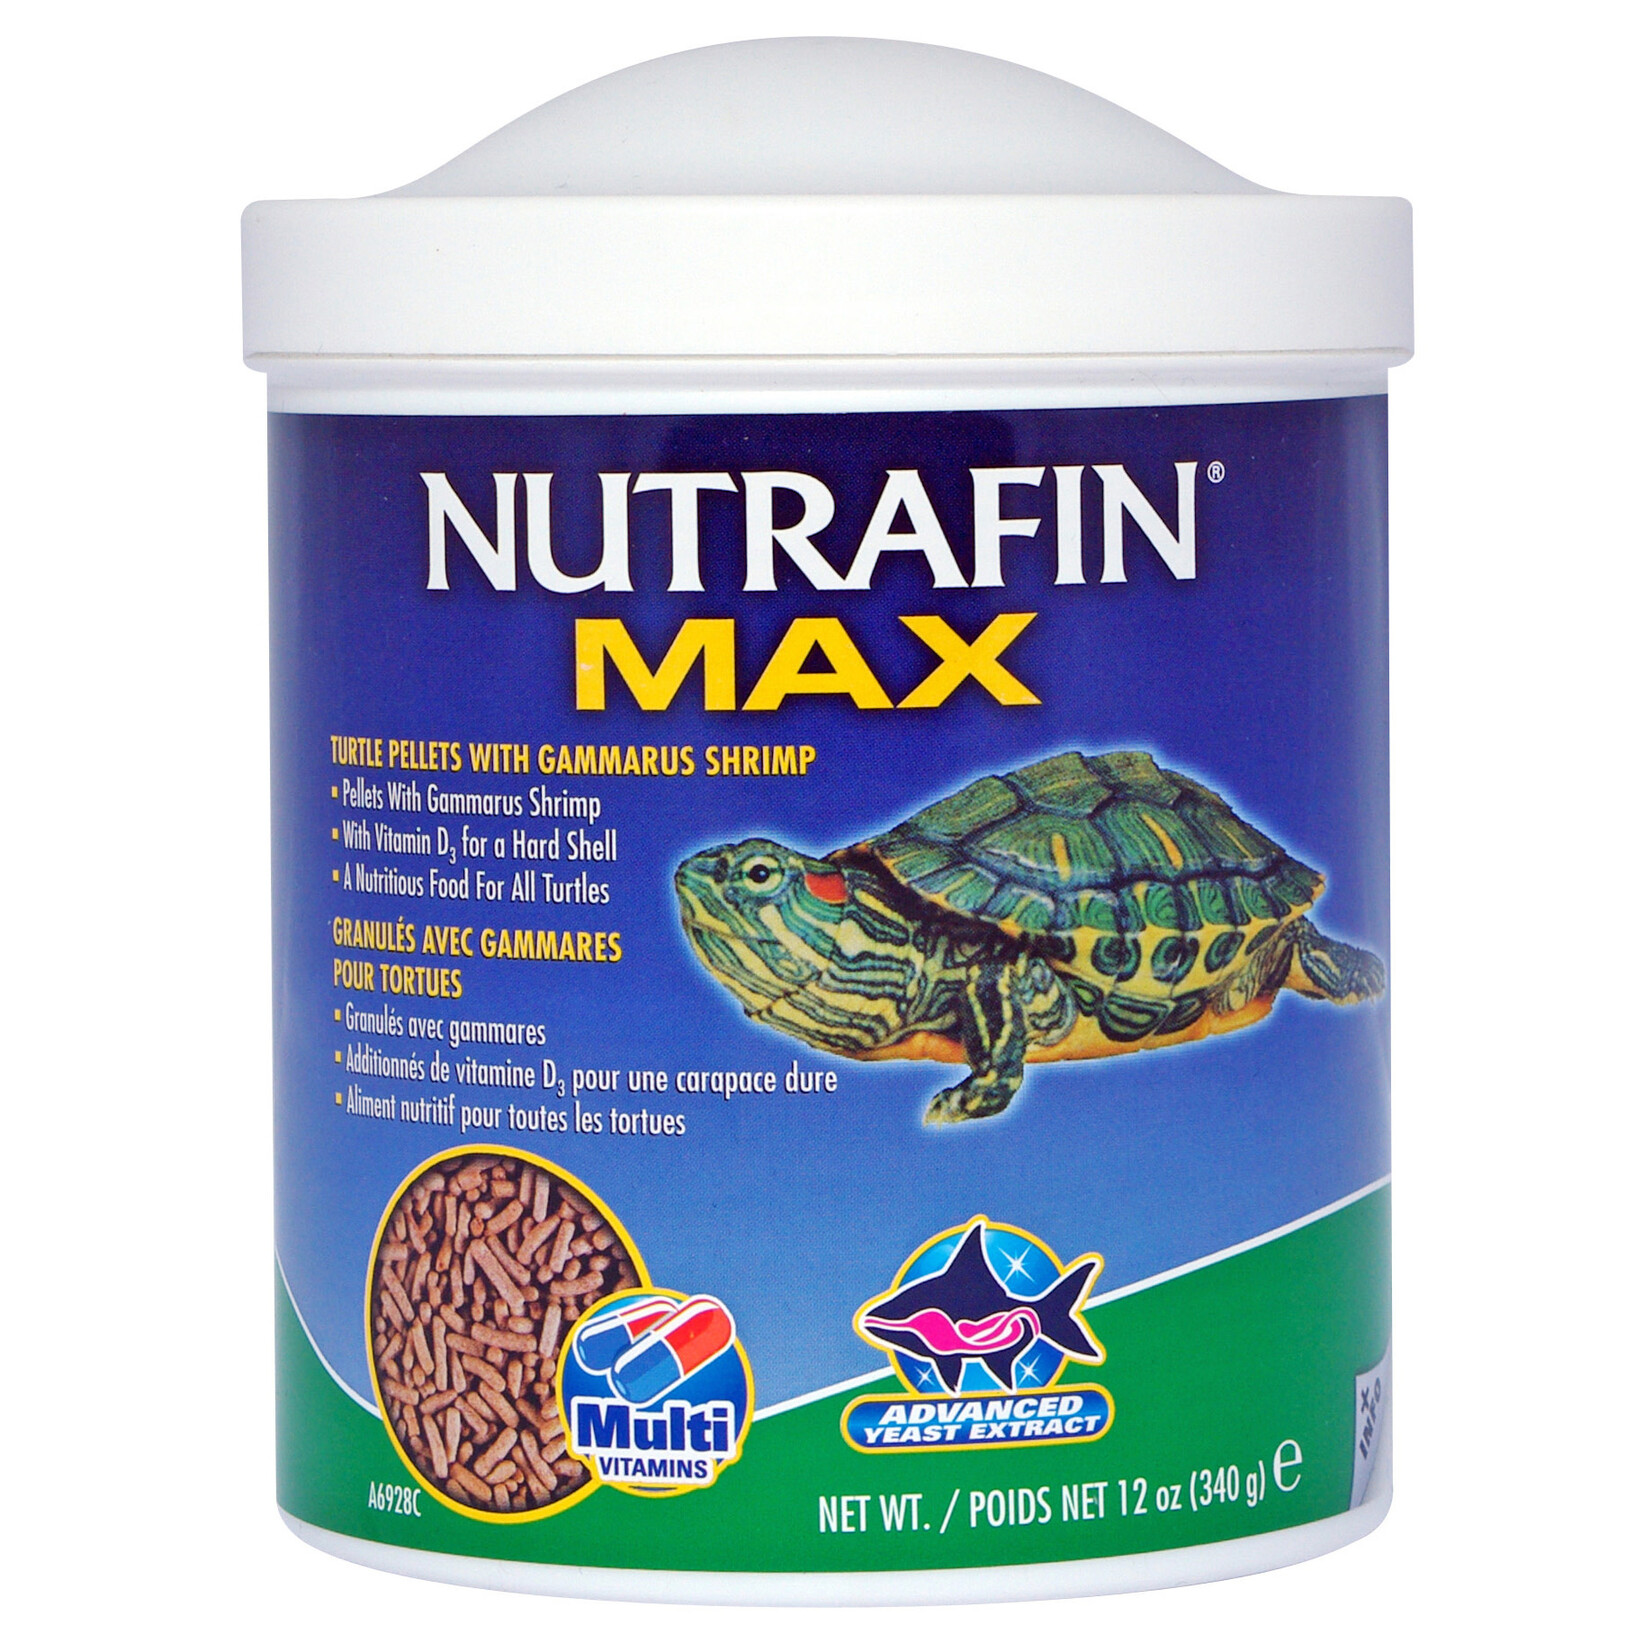 NUTRAFIN NUTRAFIN MAX GRANULES AVEC GAMMARES POUR TORTUES 340 G